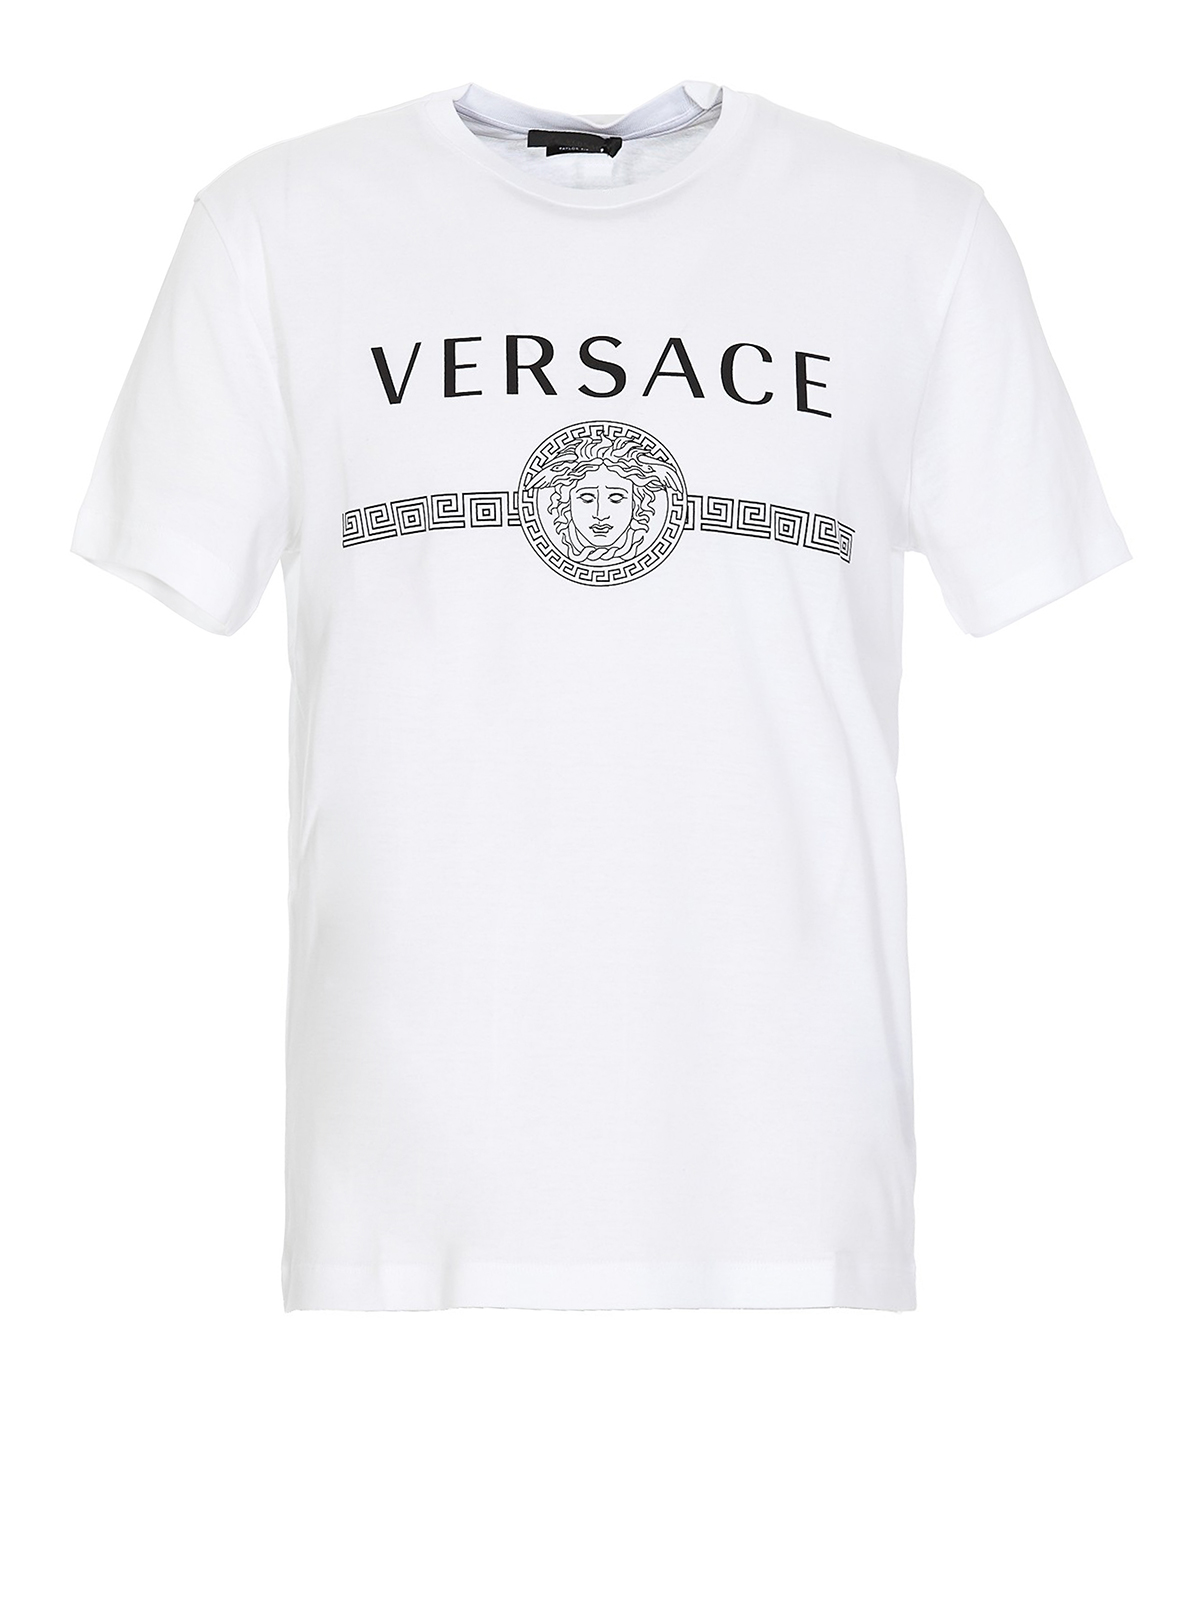 Ud over Reparation mulig dome T-shirts Versace - Medusa Head and logo print white T-shirt -  A83159A228806A1001